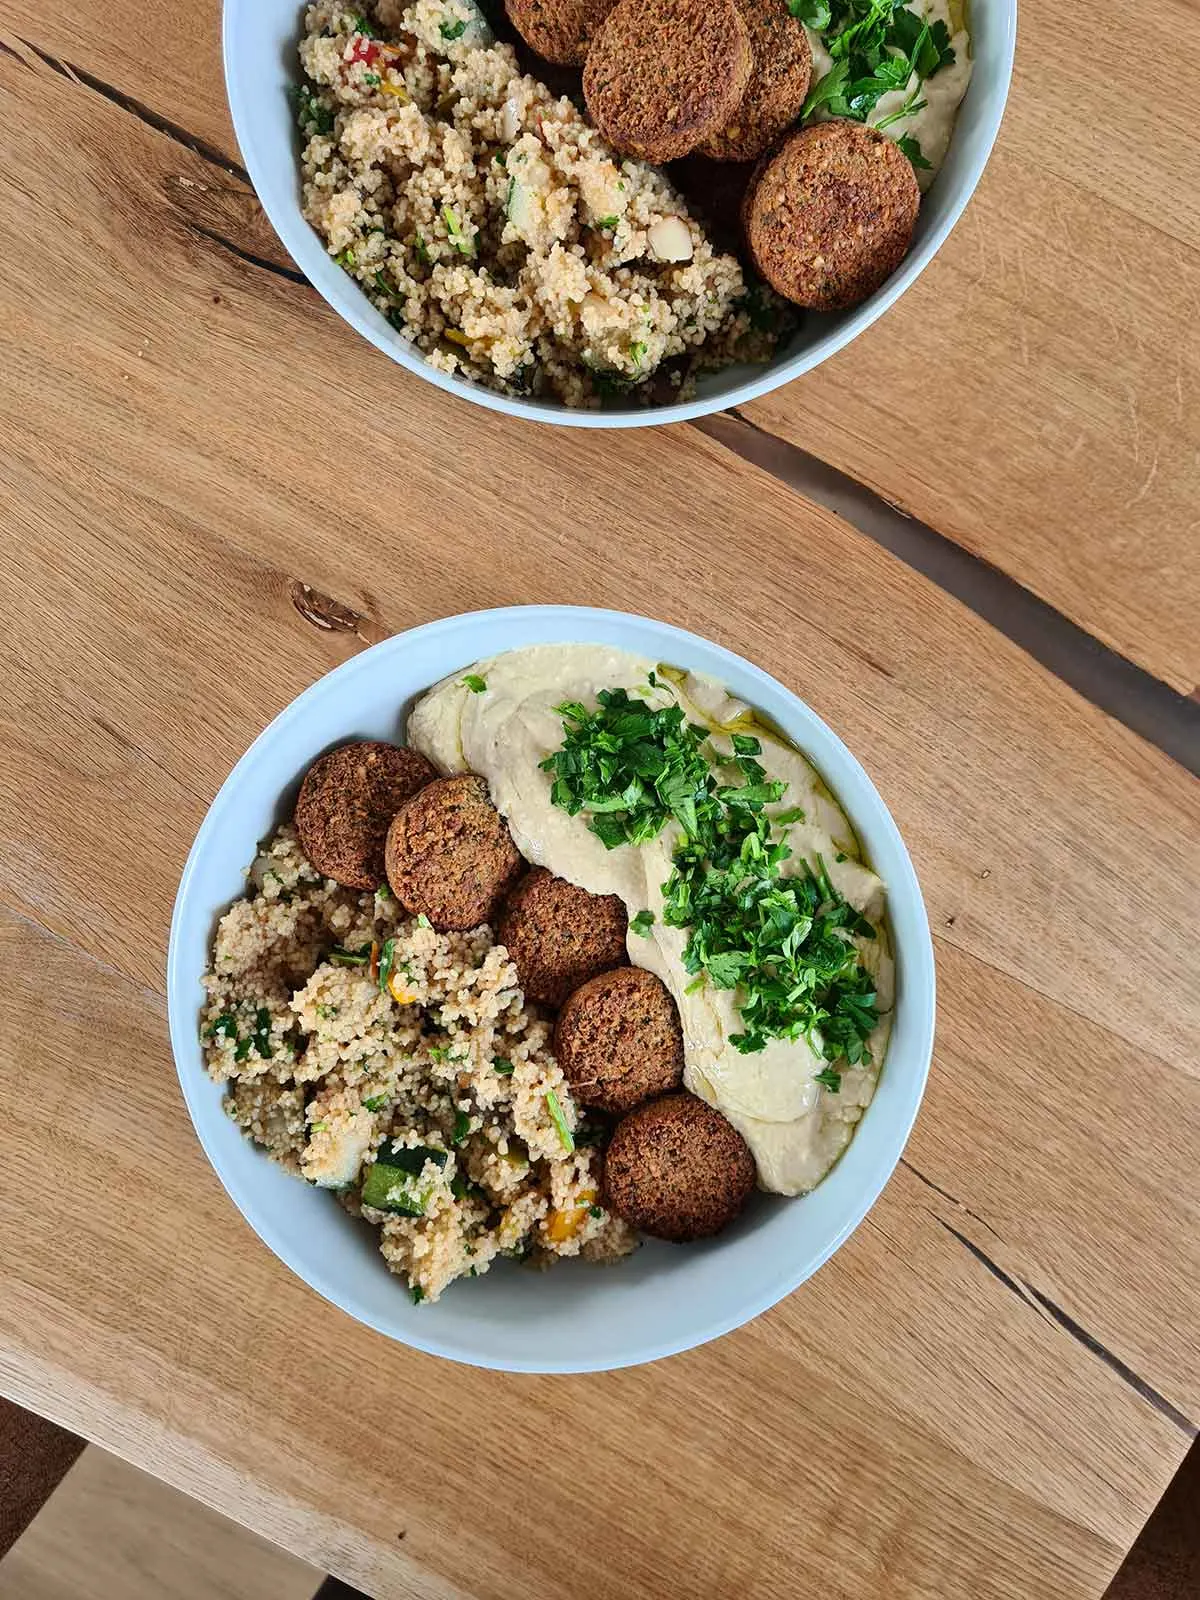 Baked falafel with homemade hummus and couscous Cuscus cu falafel copt si humus